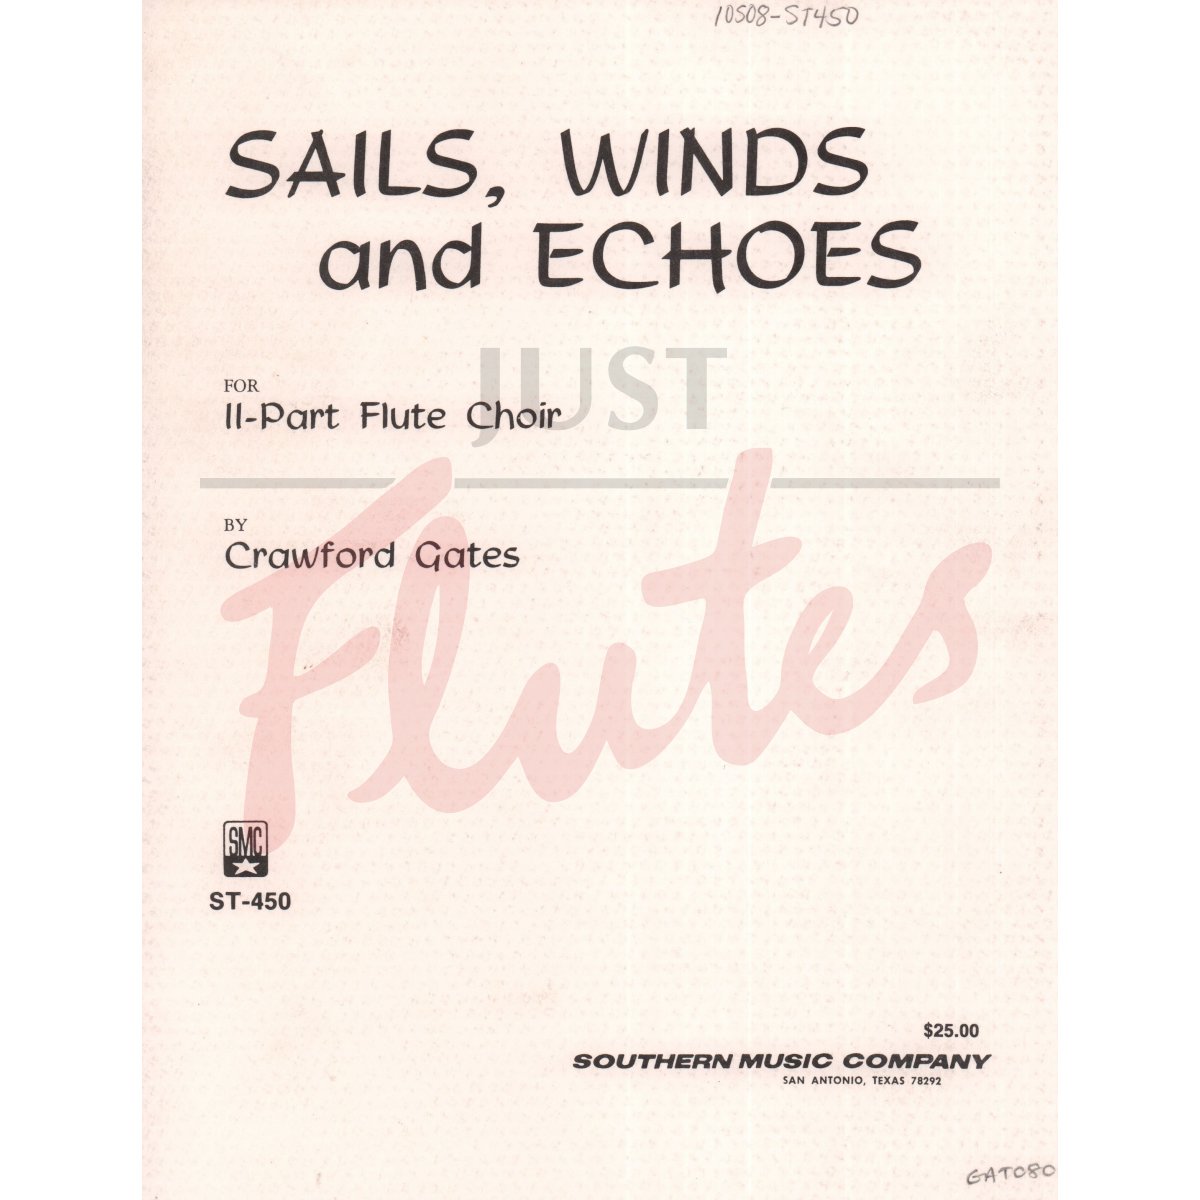 Sails, Winds and Echoes for Flute Choir